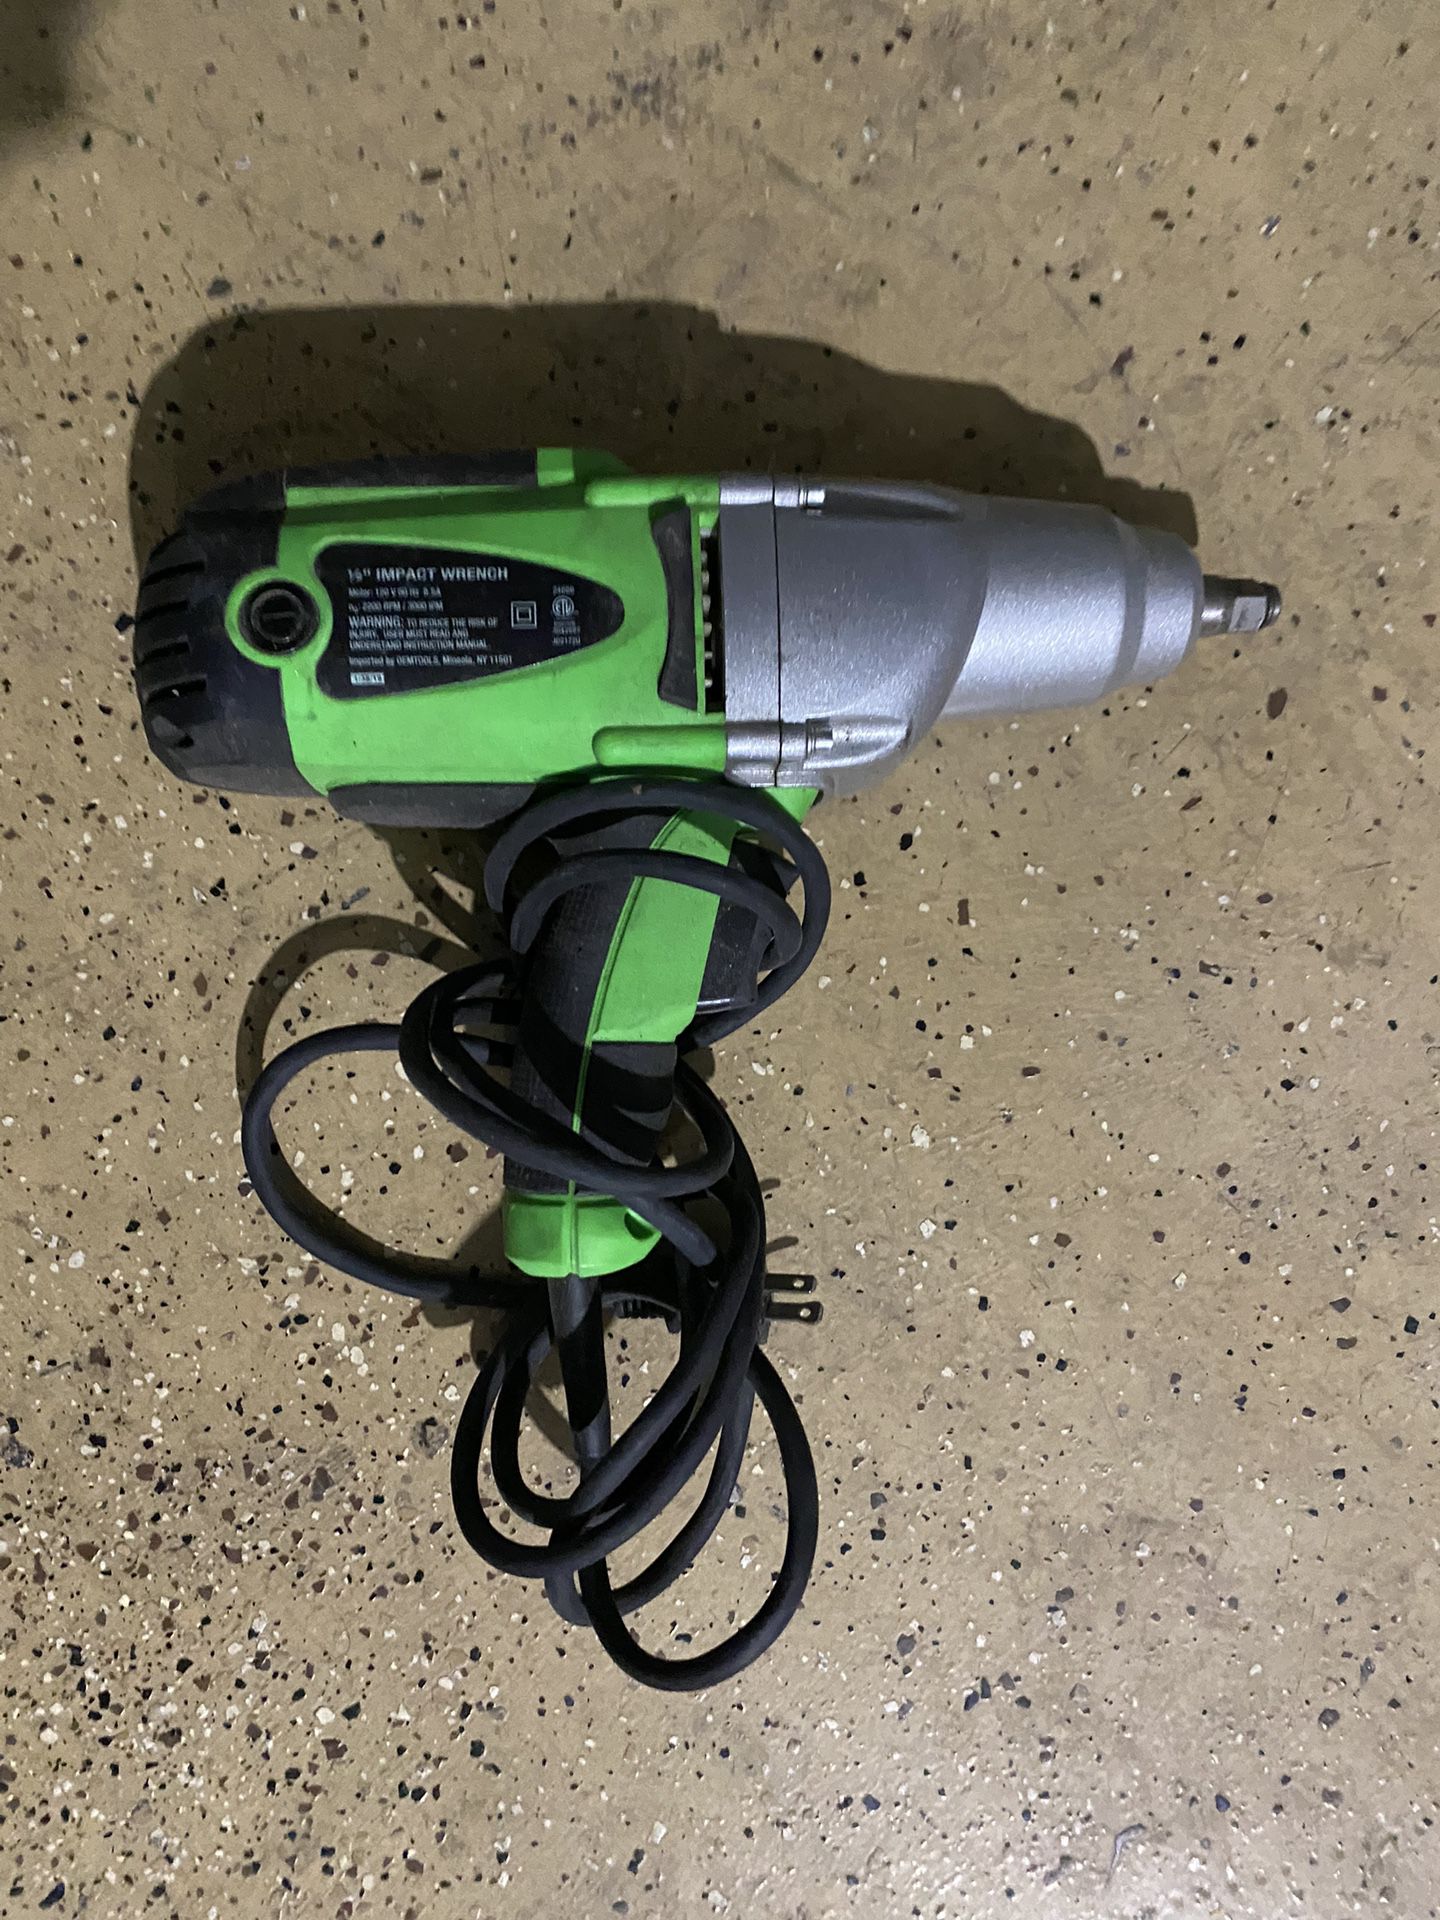 ½" IMPACT WRENCH